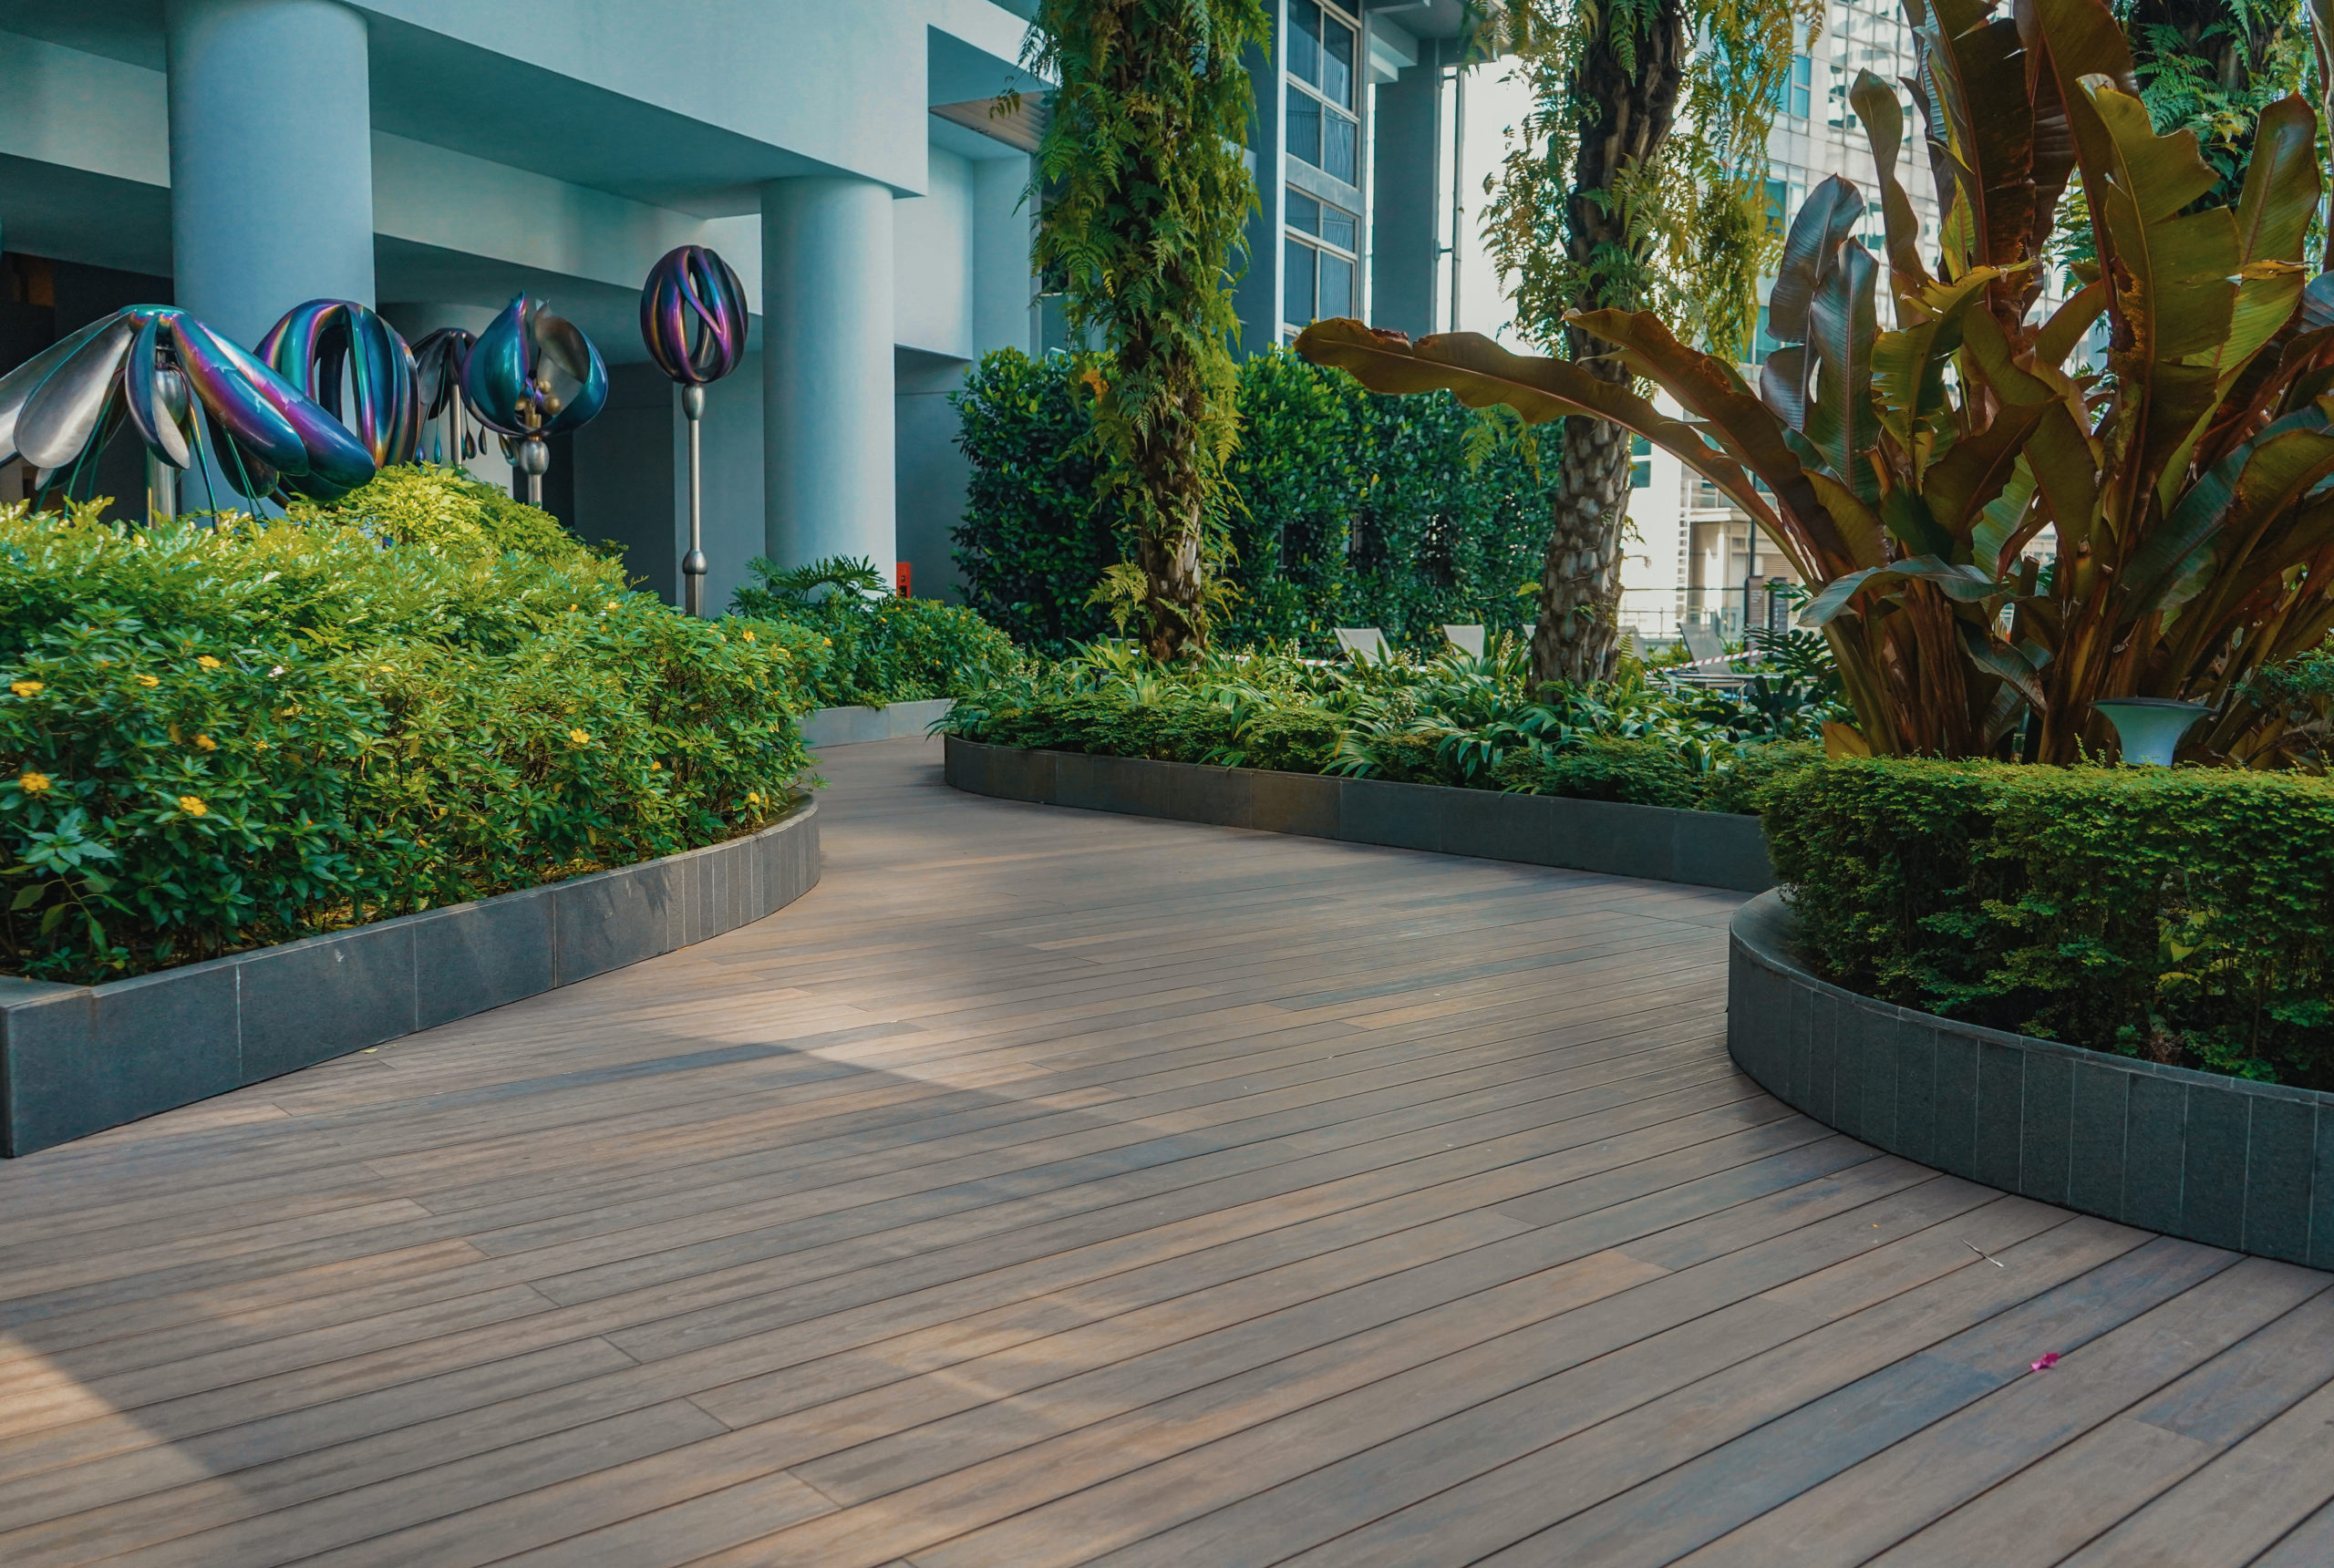 Tulou Composite Timber Decking Singapore Cairnhill Nine After 2 scaled - Cairnhill Nine Condominium